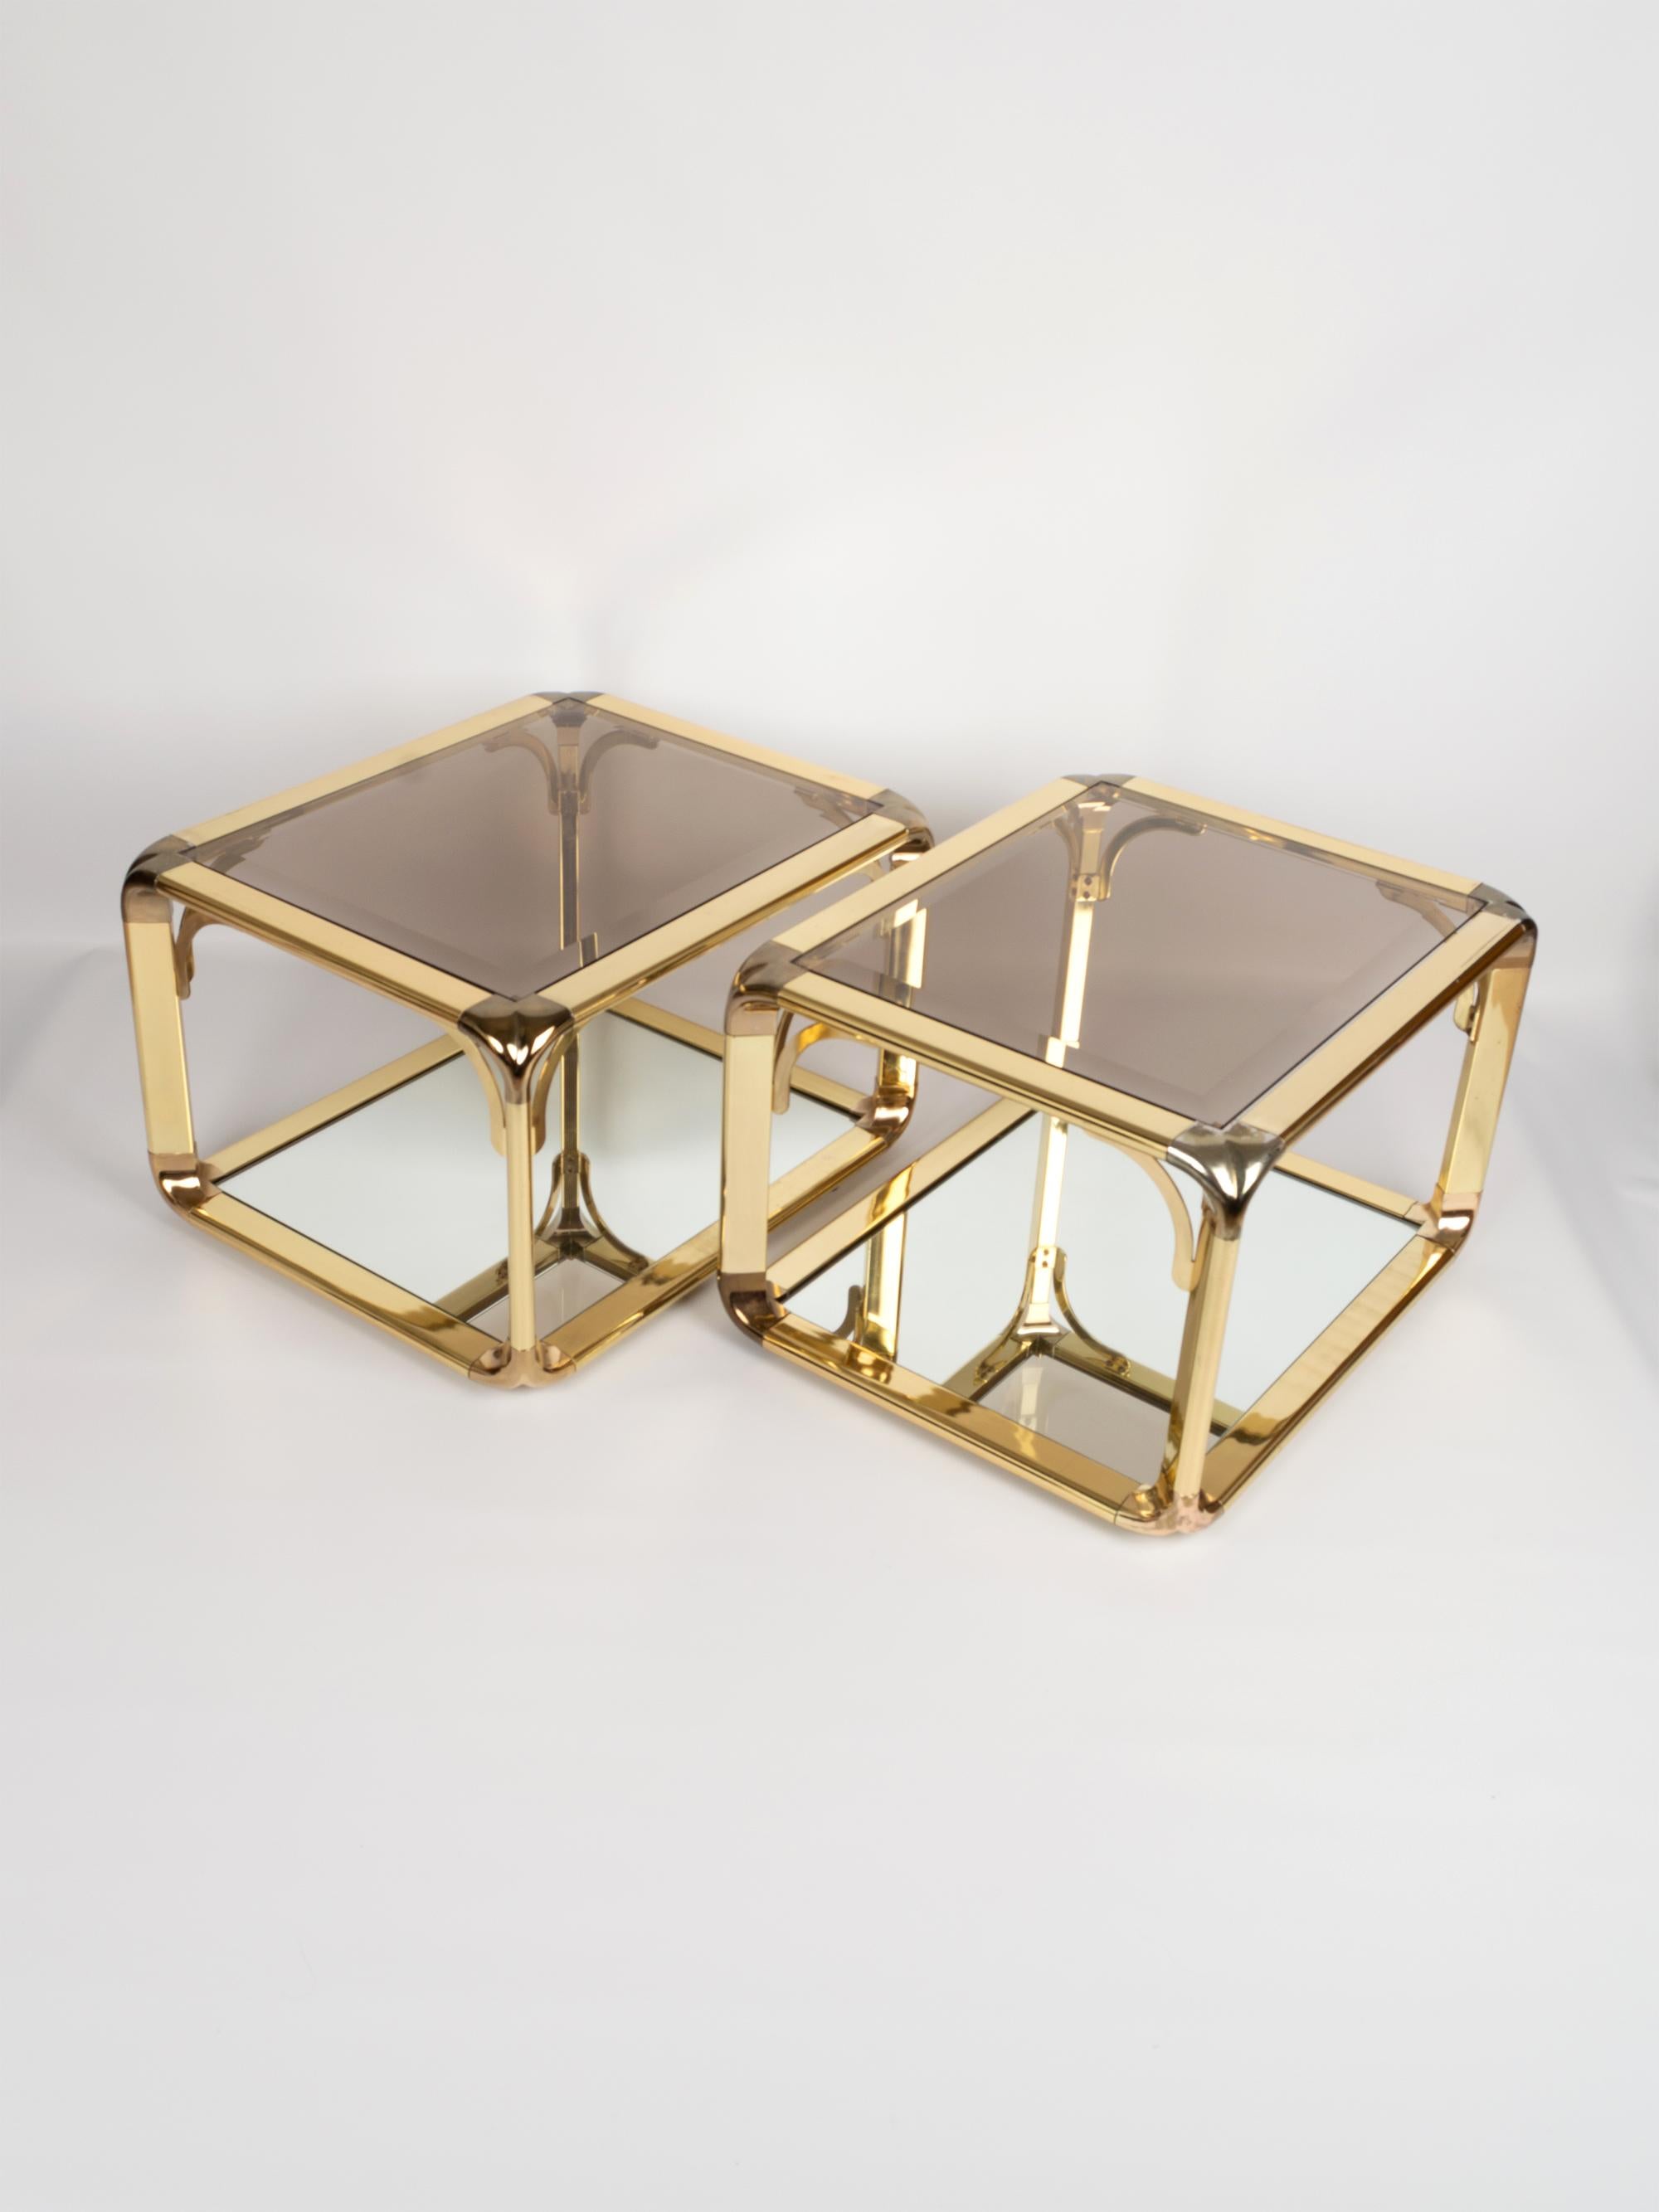 Pair of Mirrored Gold Chrome End Tables / Side Tables, Belgium, circa 1970 For Sale 6